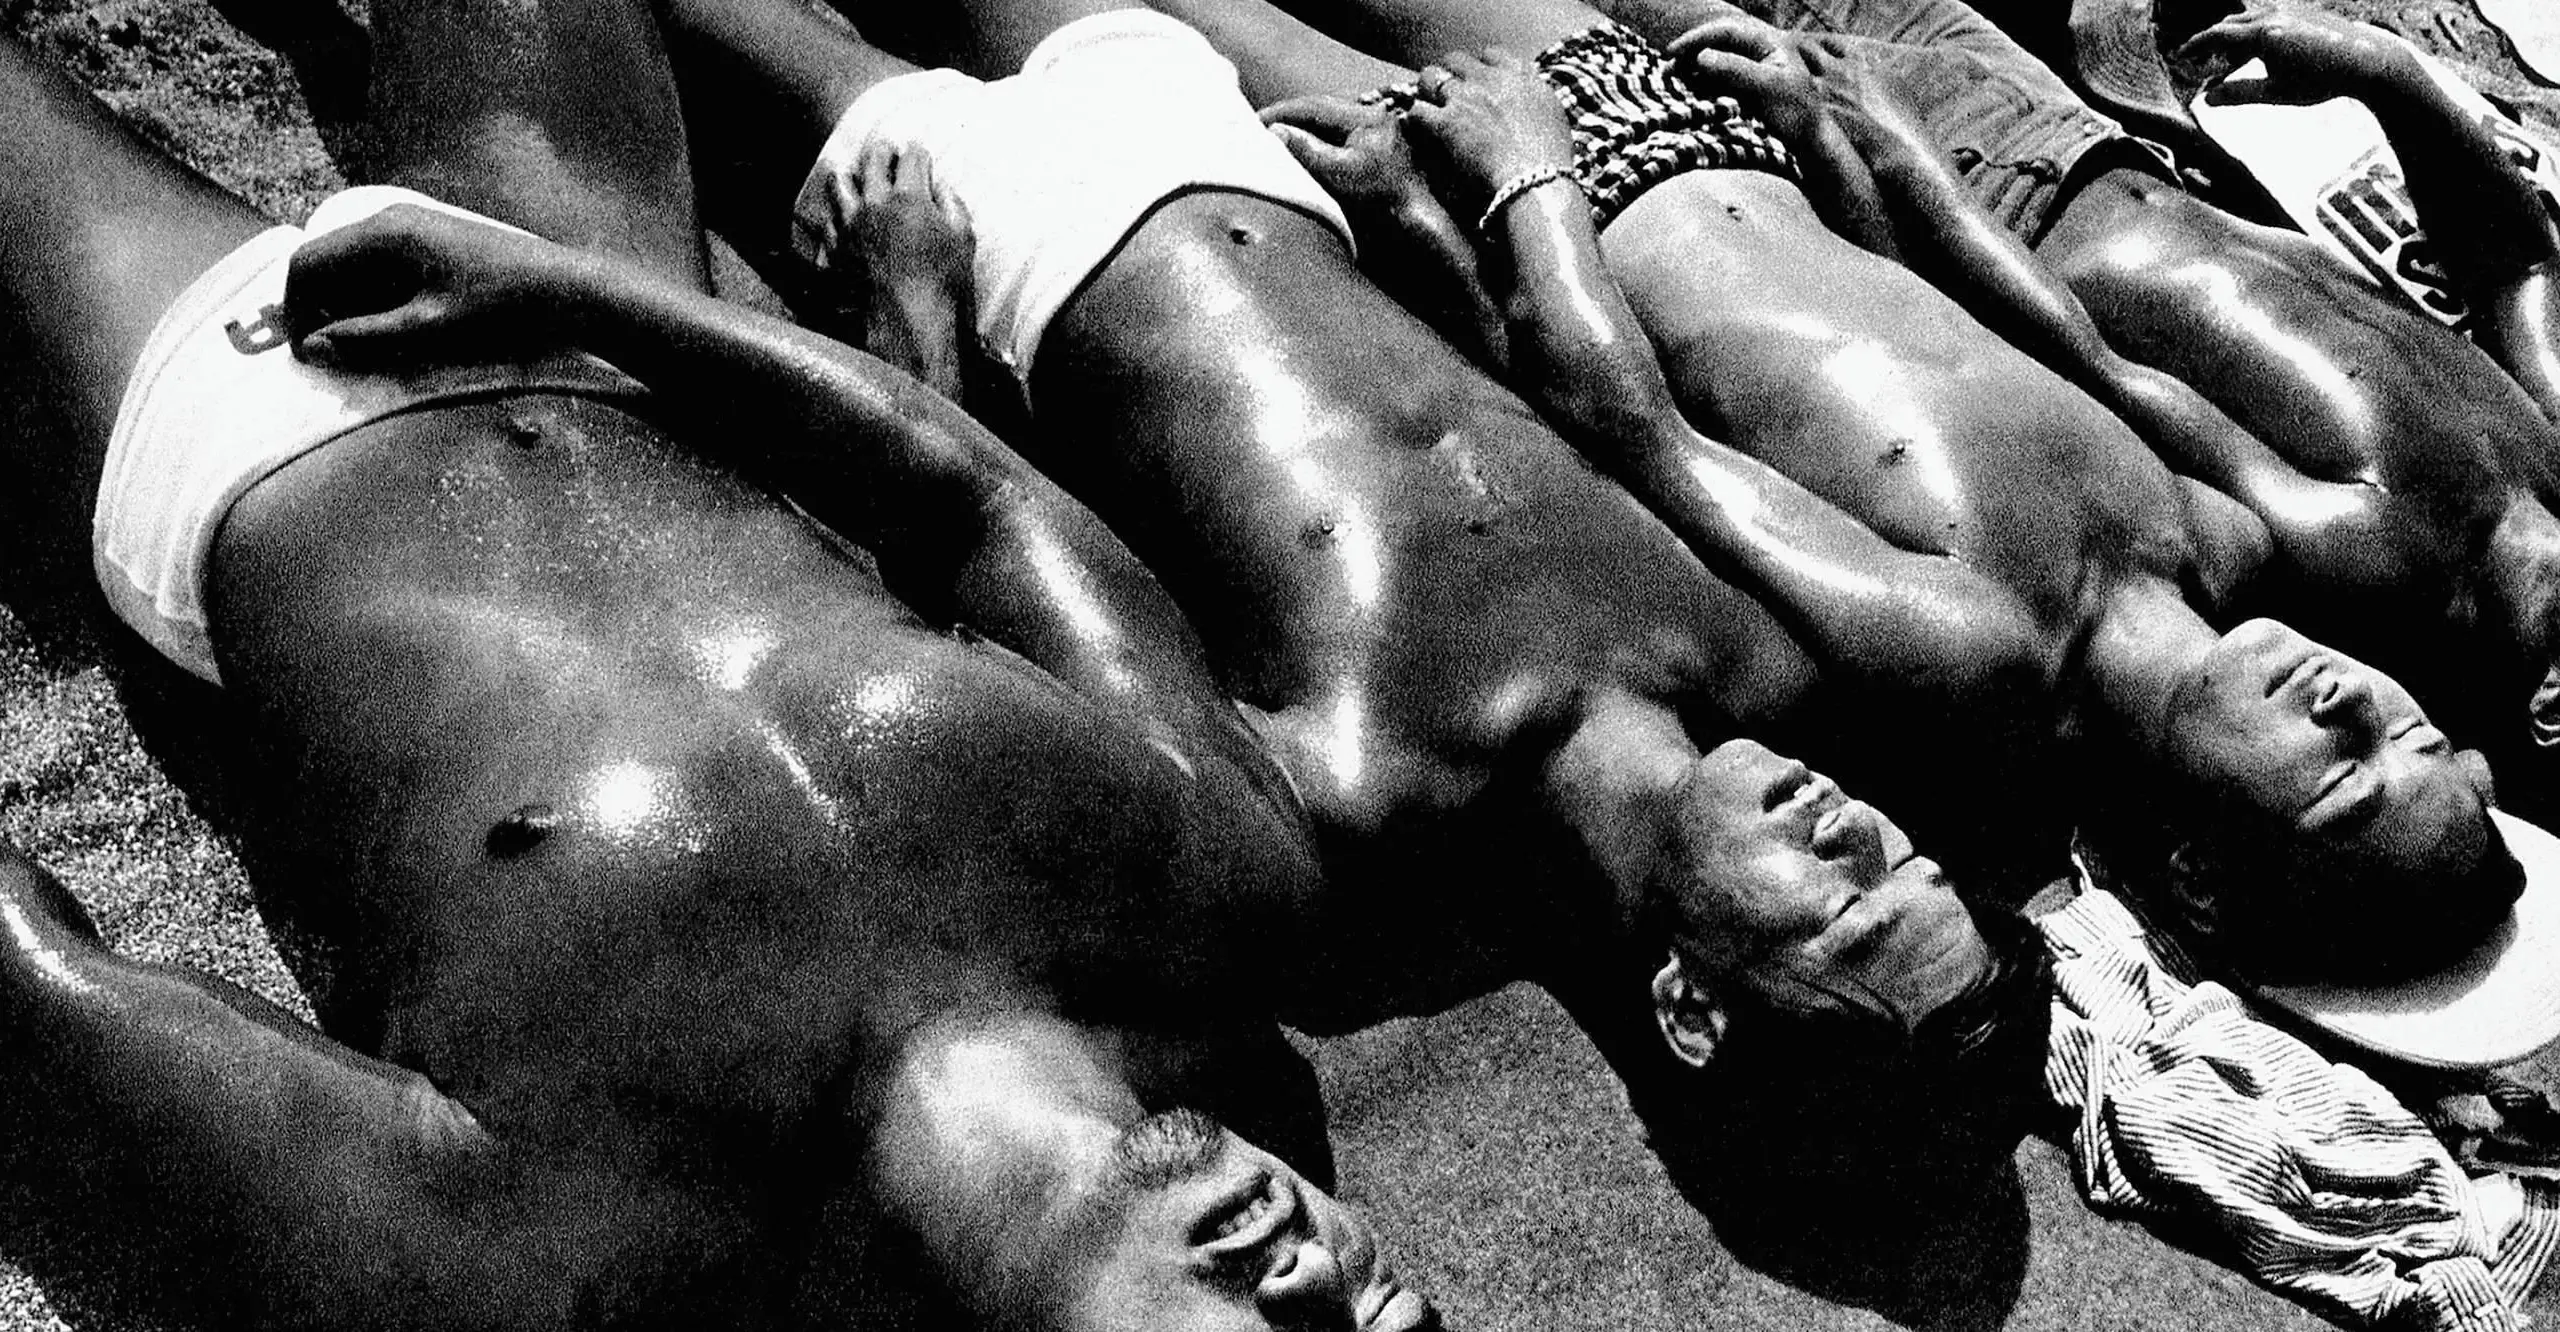 Black and white photograph of a row of shirtless sunbathing men